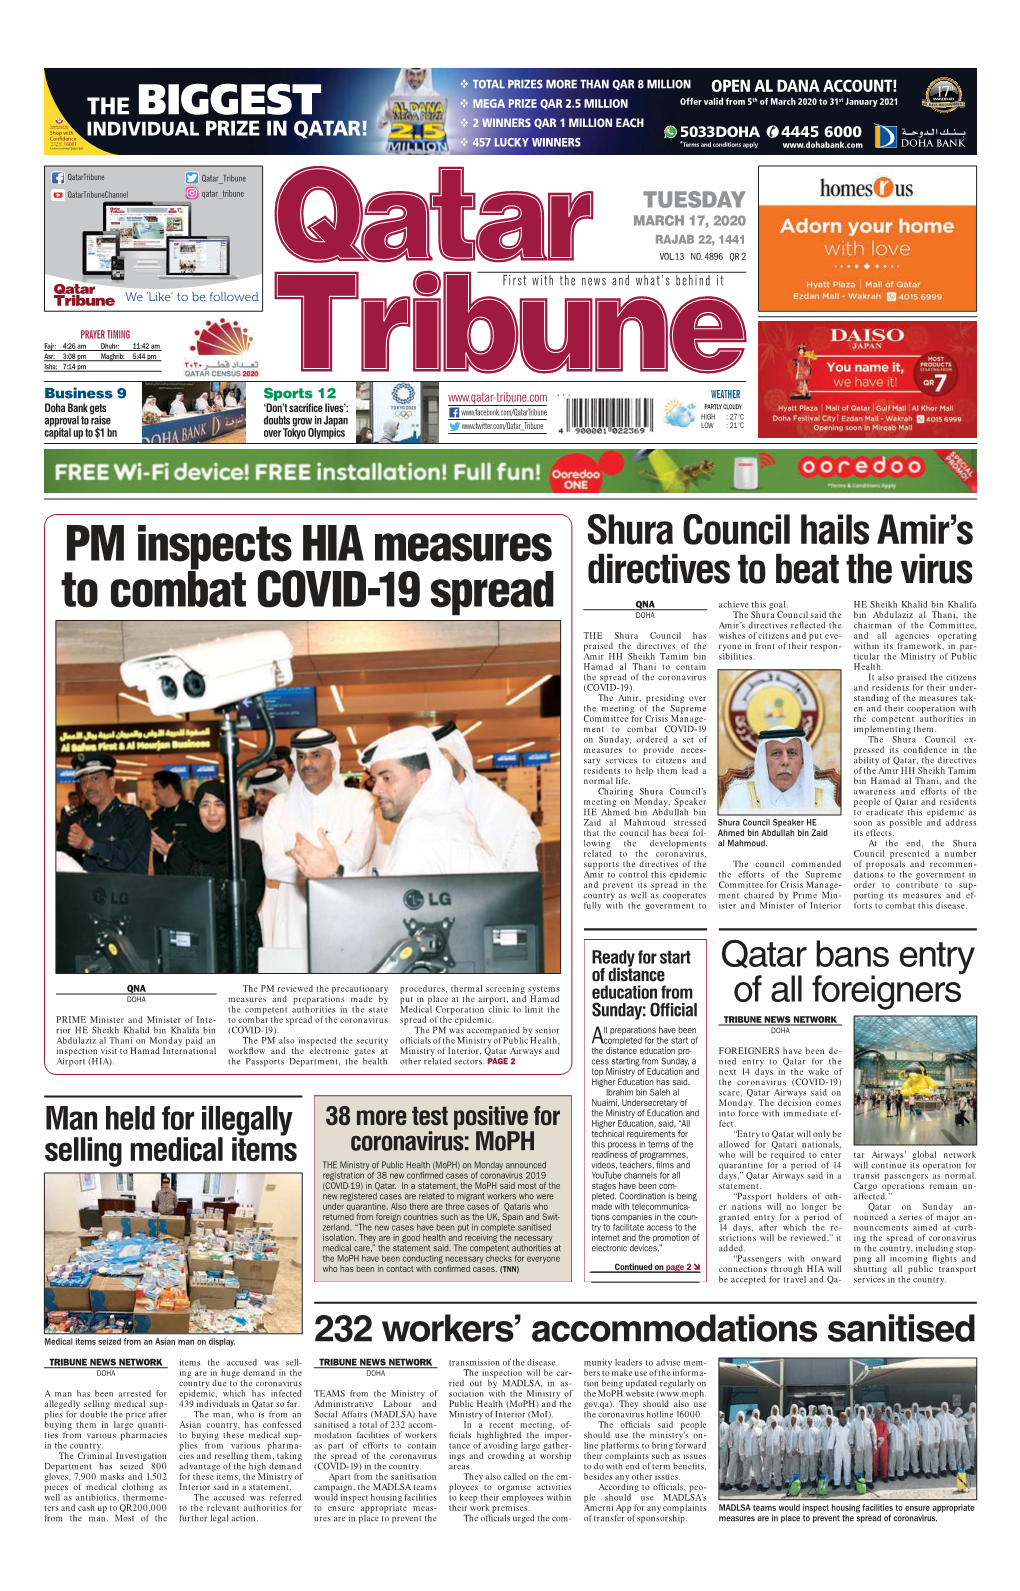 PM Inspects HIA Measures to Combat COVID-19 Spread